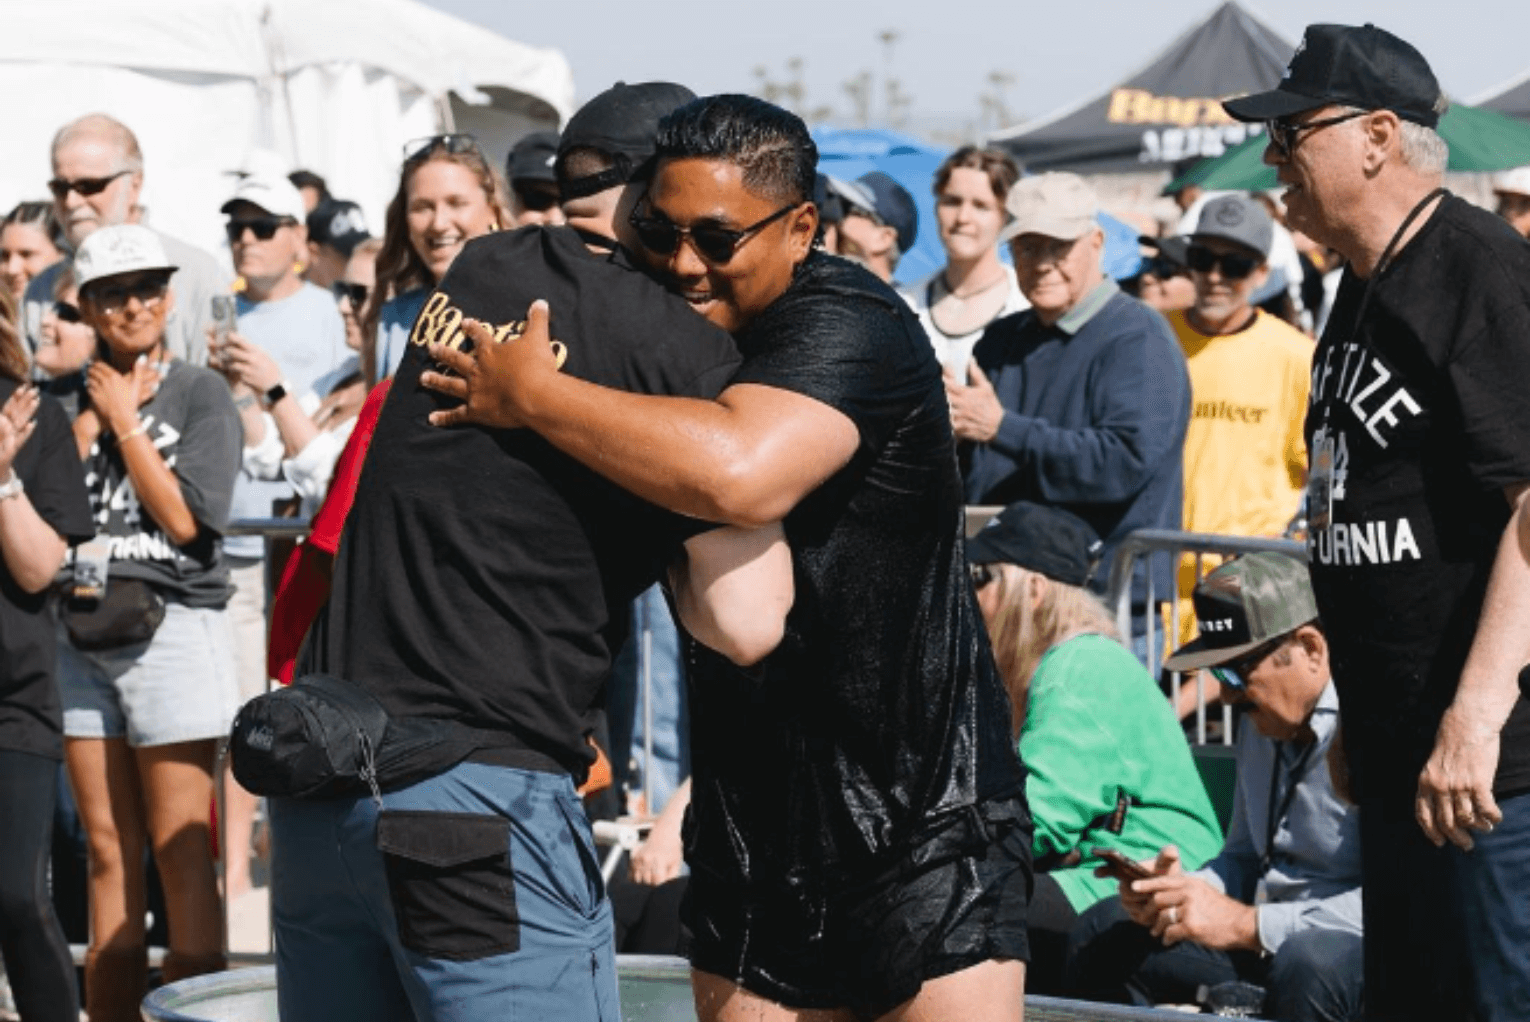 California Church’s State-Wide Revival Sees 30,000 Baptisms